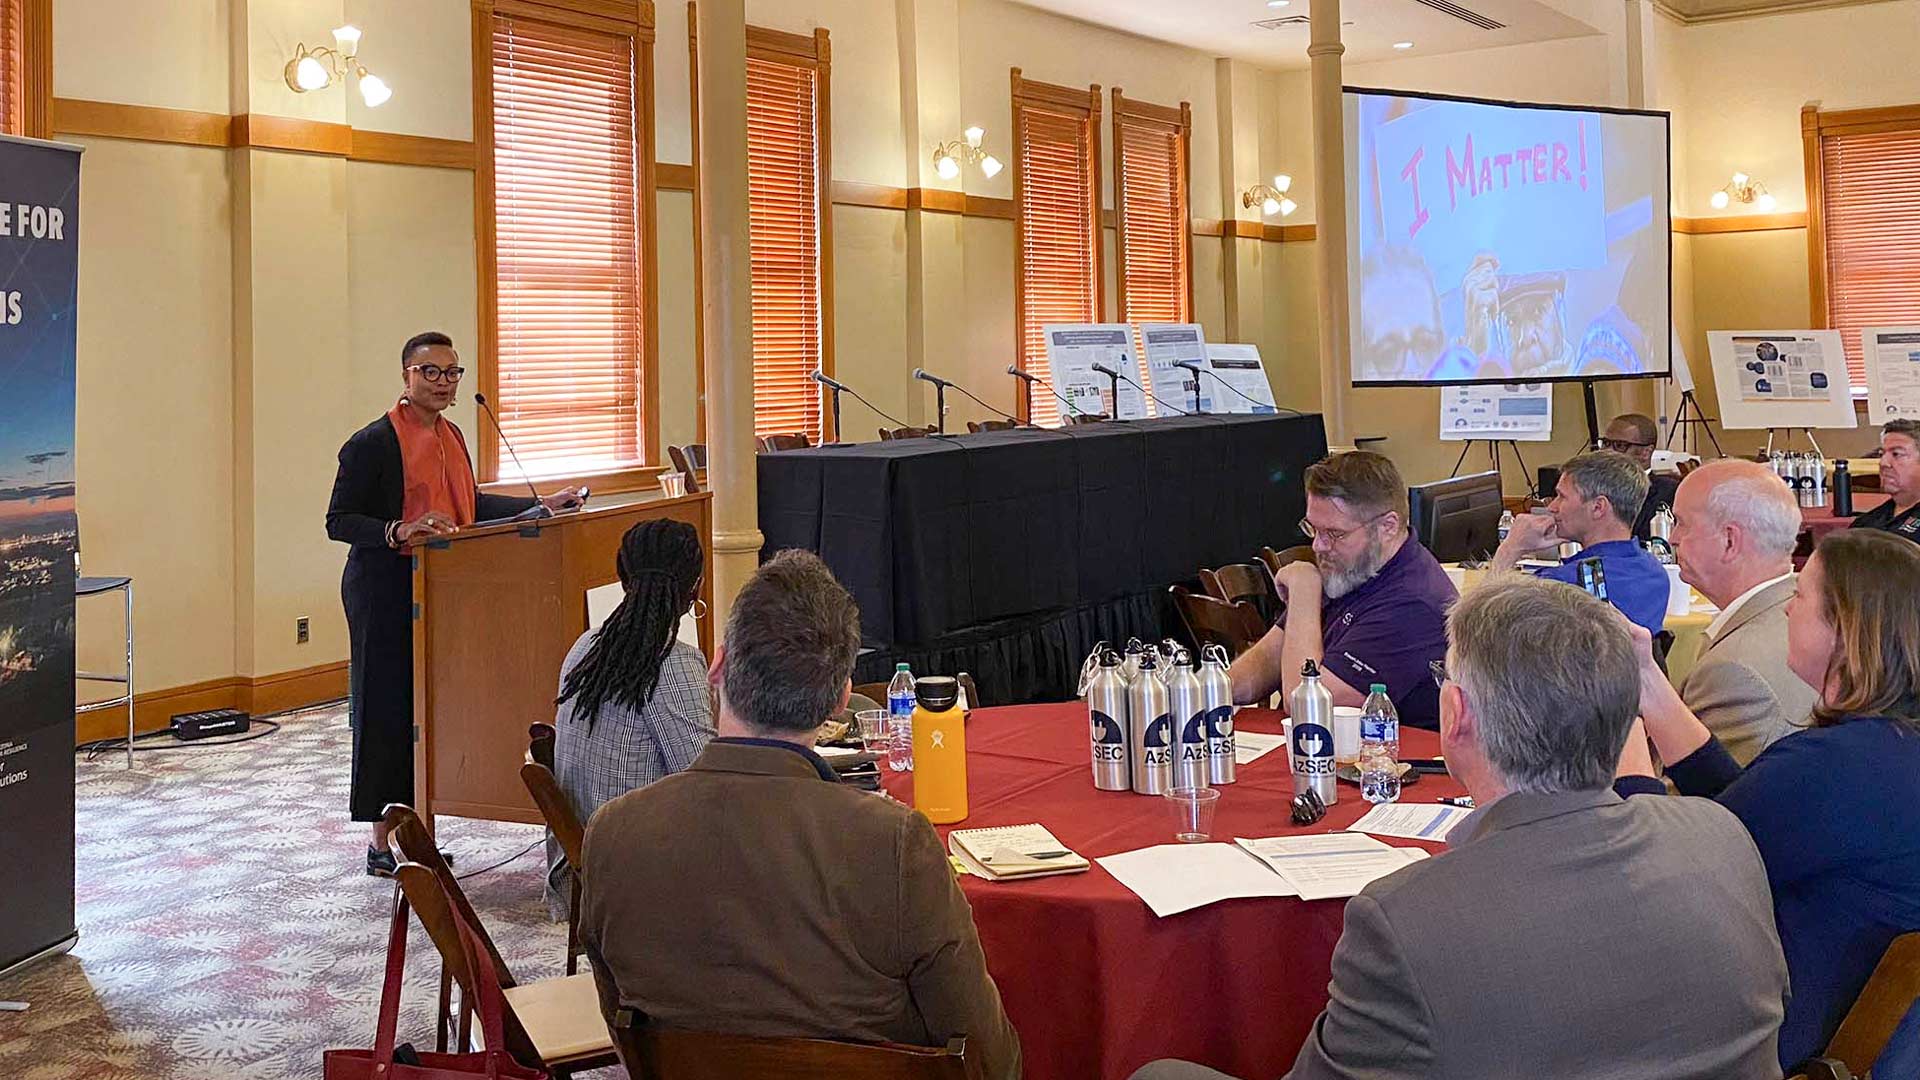 Shalanda H. Baker, director of the U.S. Department of Energy’s Office of Economic Impact and Diversity, addresses the attendees of the Arizona Student Energy Conference held at Arizona State University.